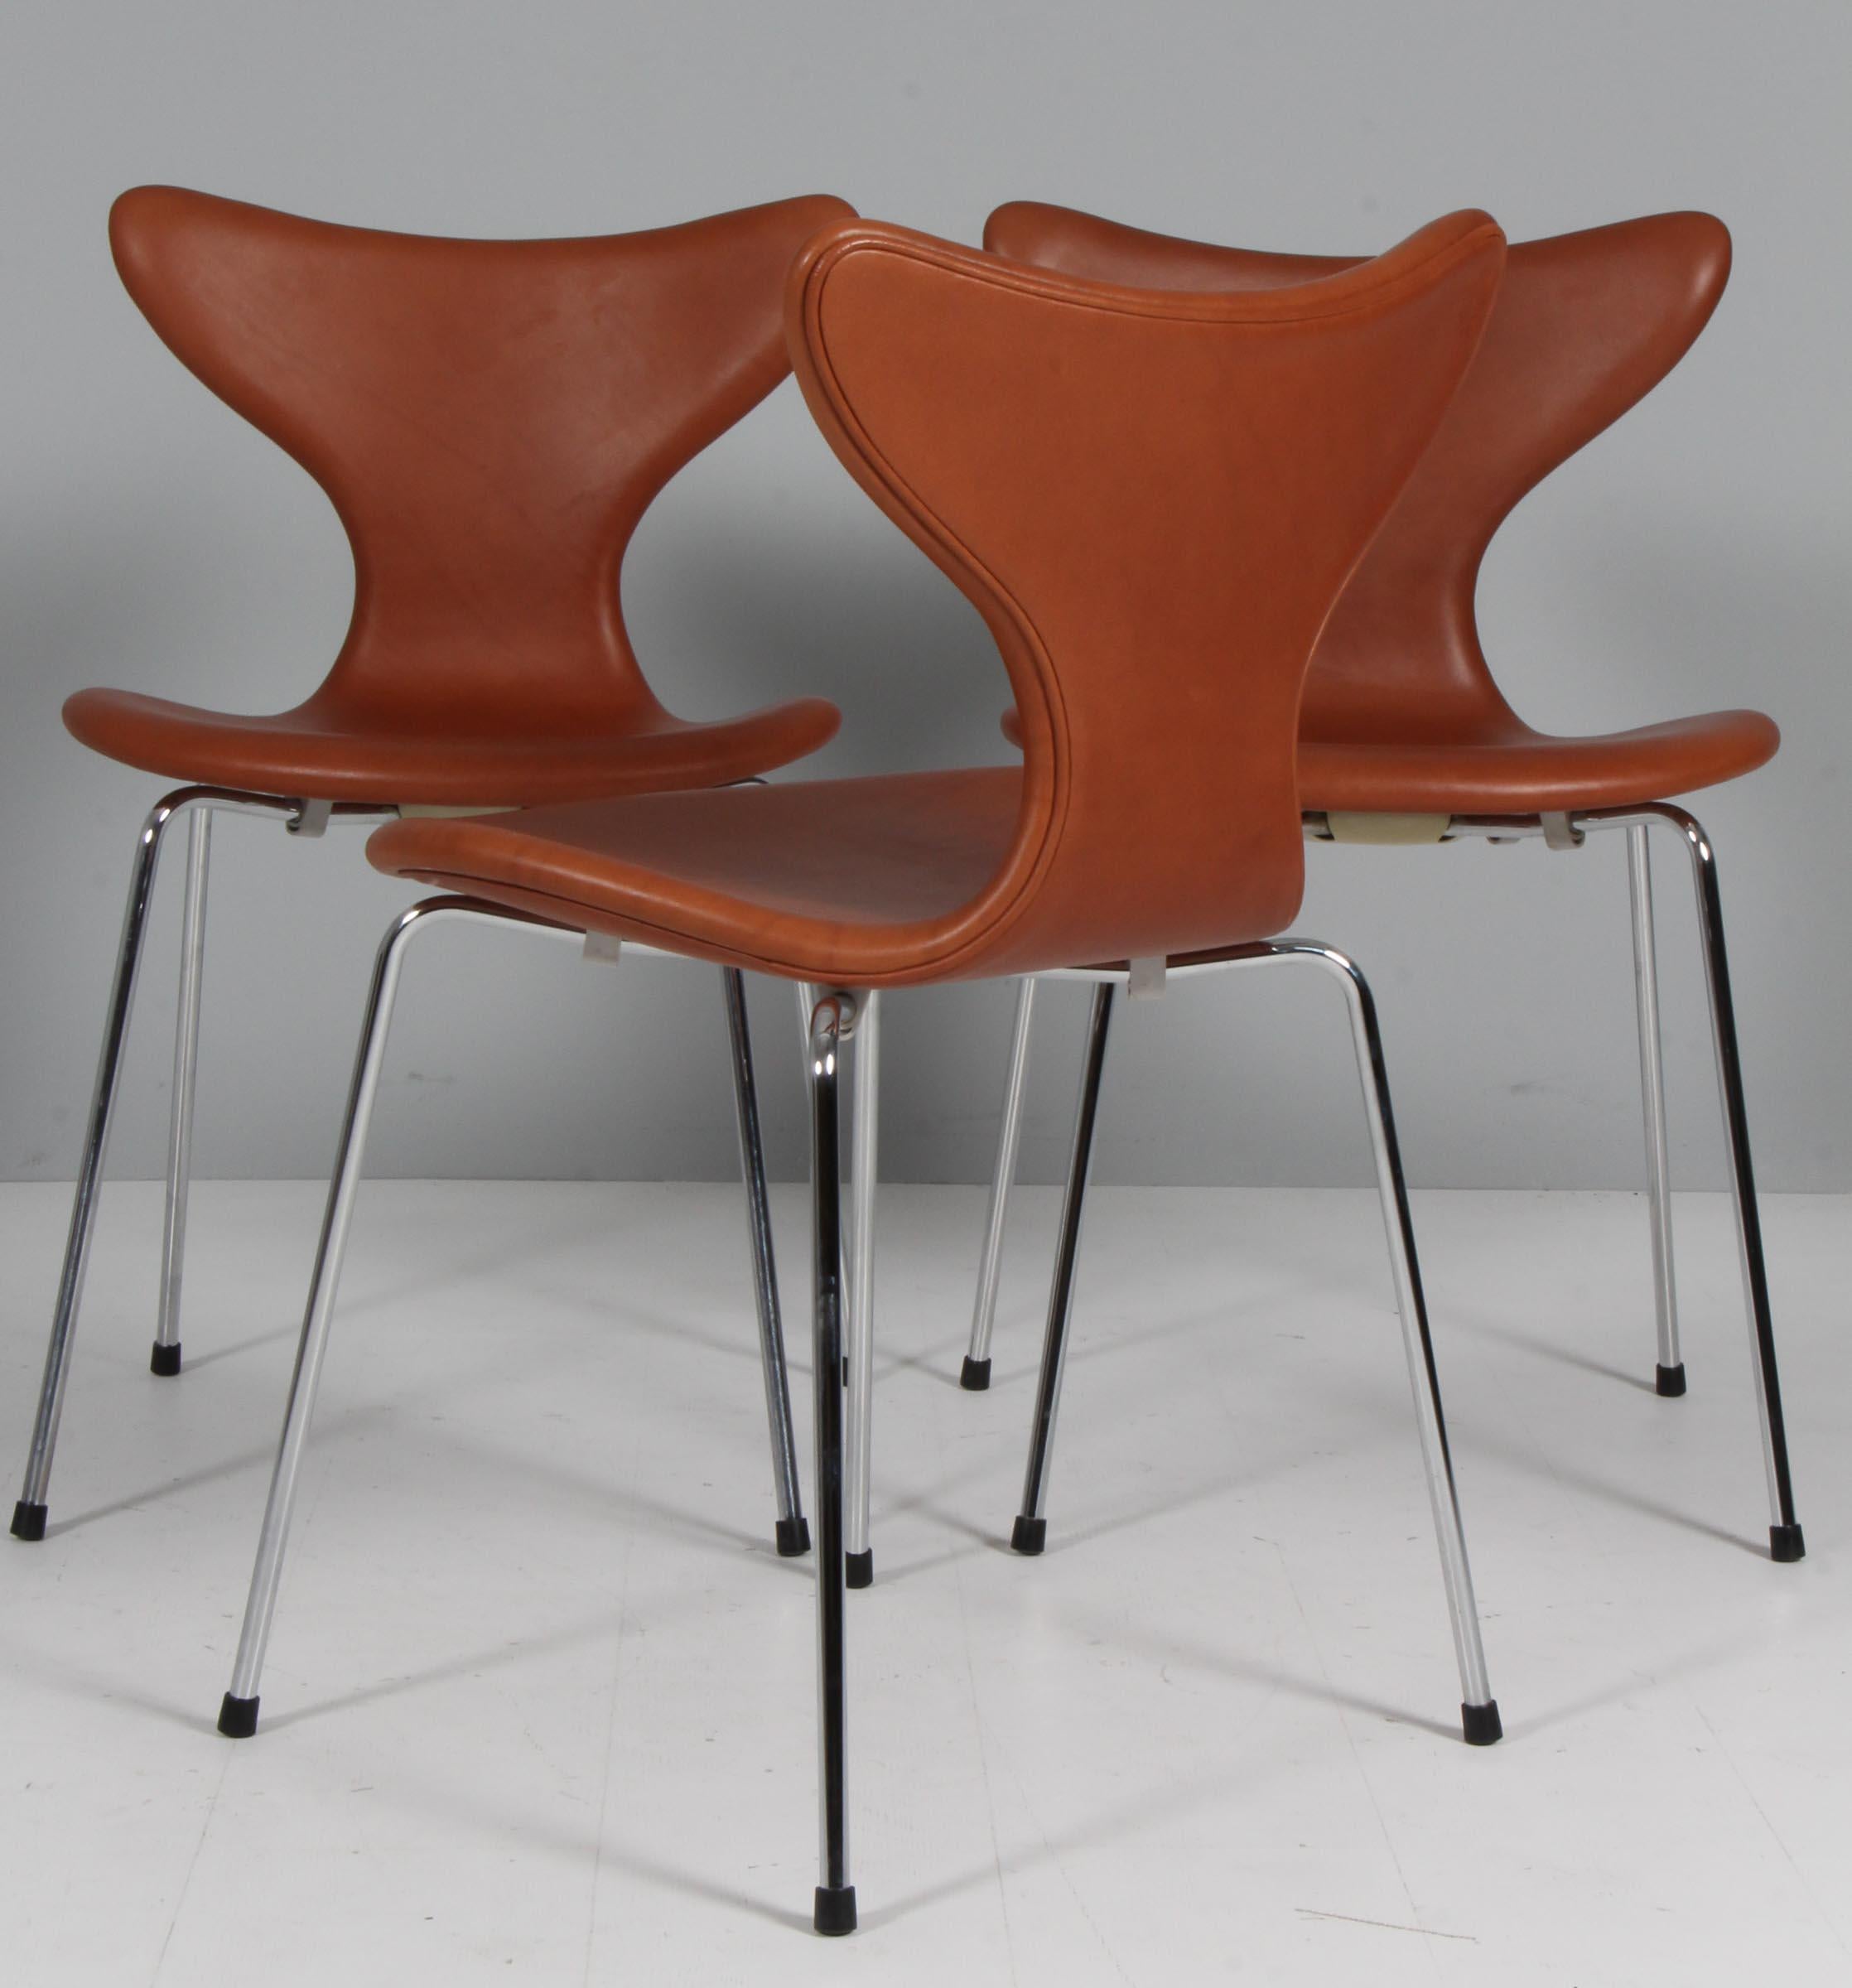 Mid-20th Century Arne Jacobsen, Seagull, Dining Chair